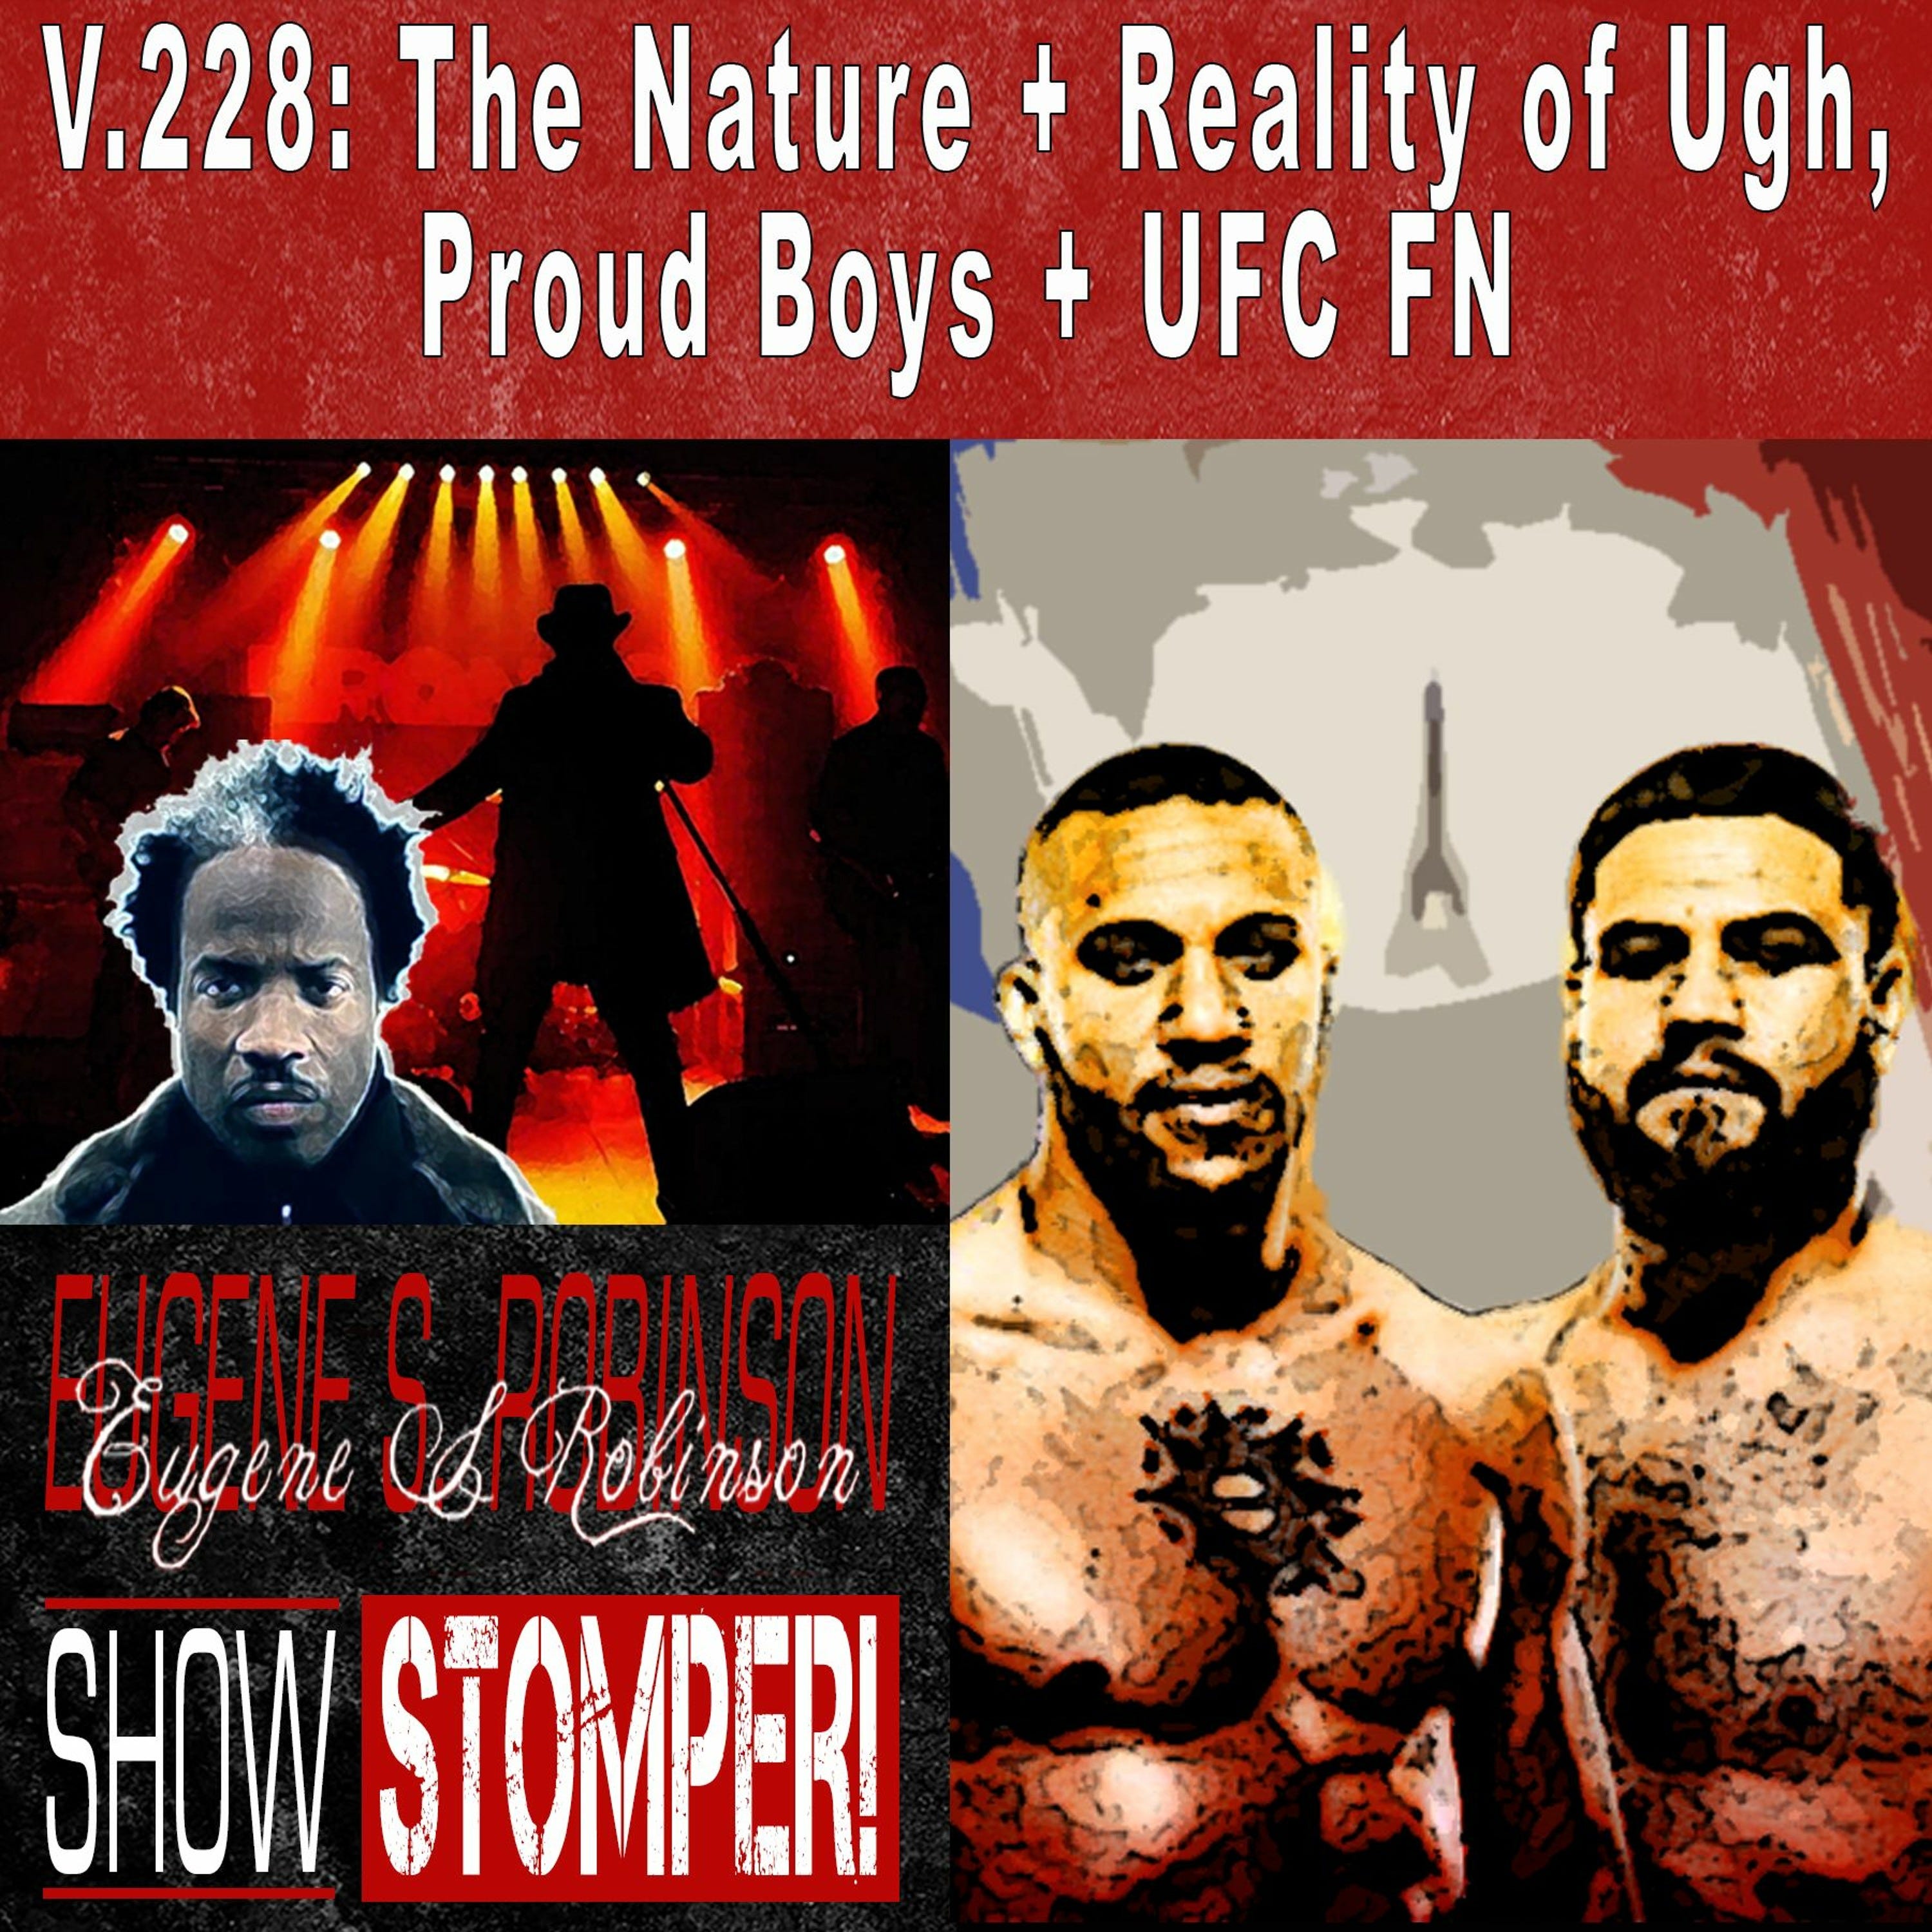 V.228: The Nature + Reality of Ugh, Proud Boys + UFC FN On The Eugene S. Robinson Show Stomper!